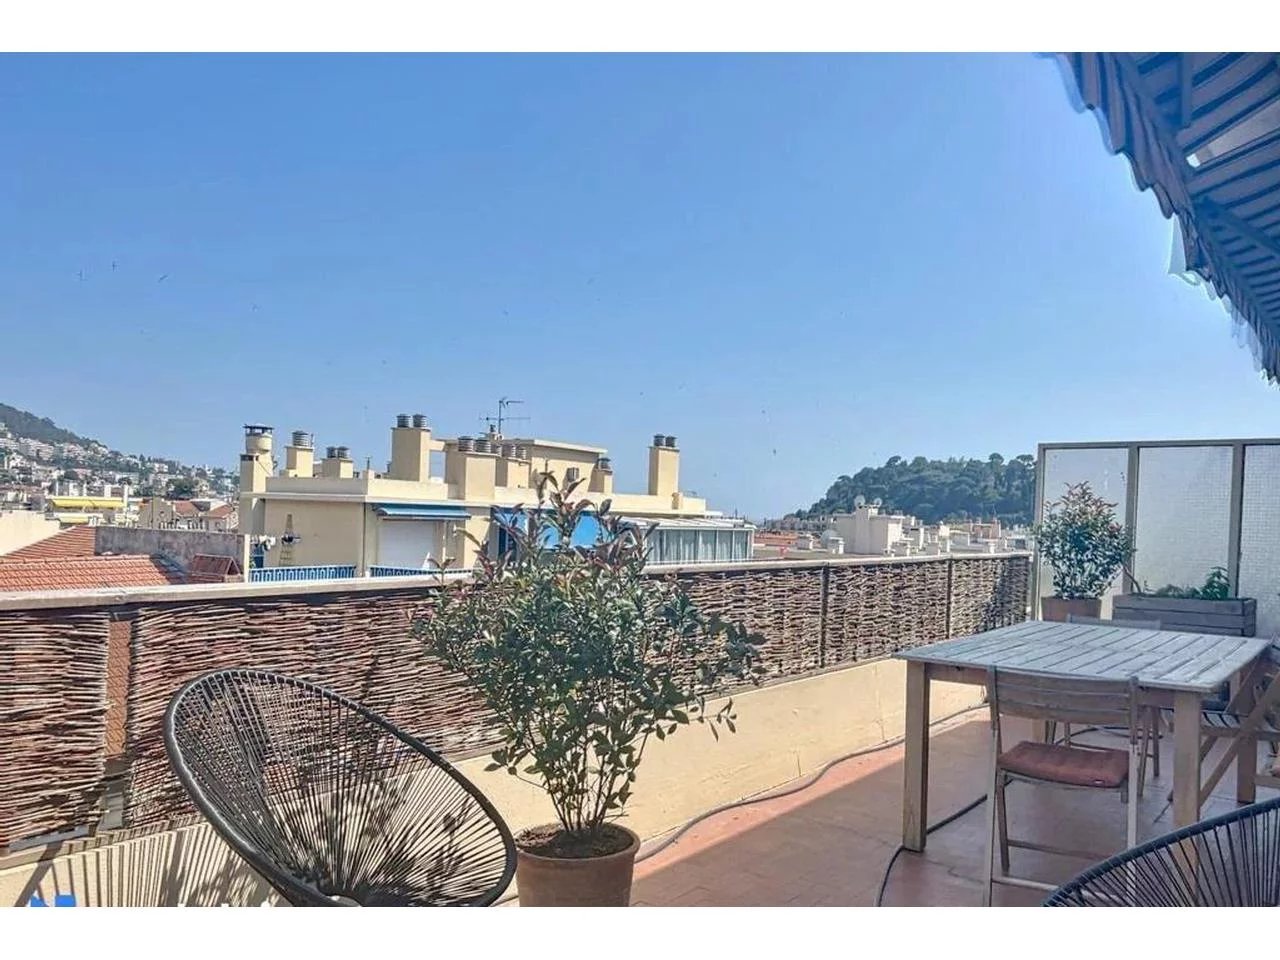 Appartement  3 Rooms 85.35m2  for sale   599 000 €